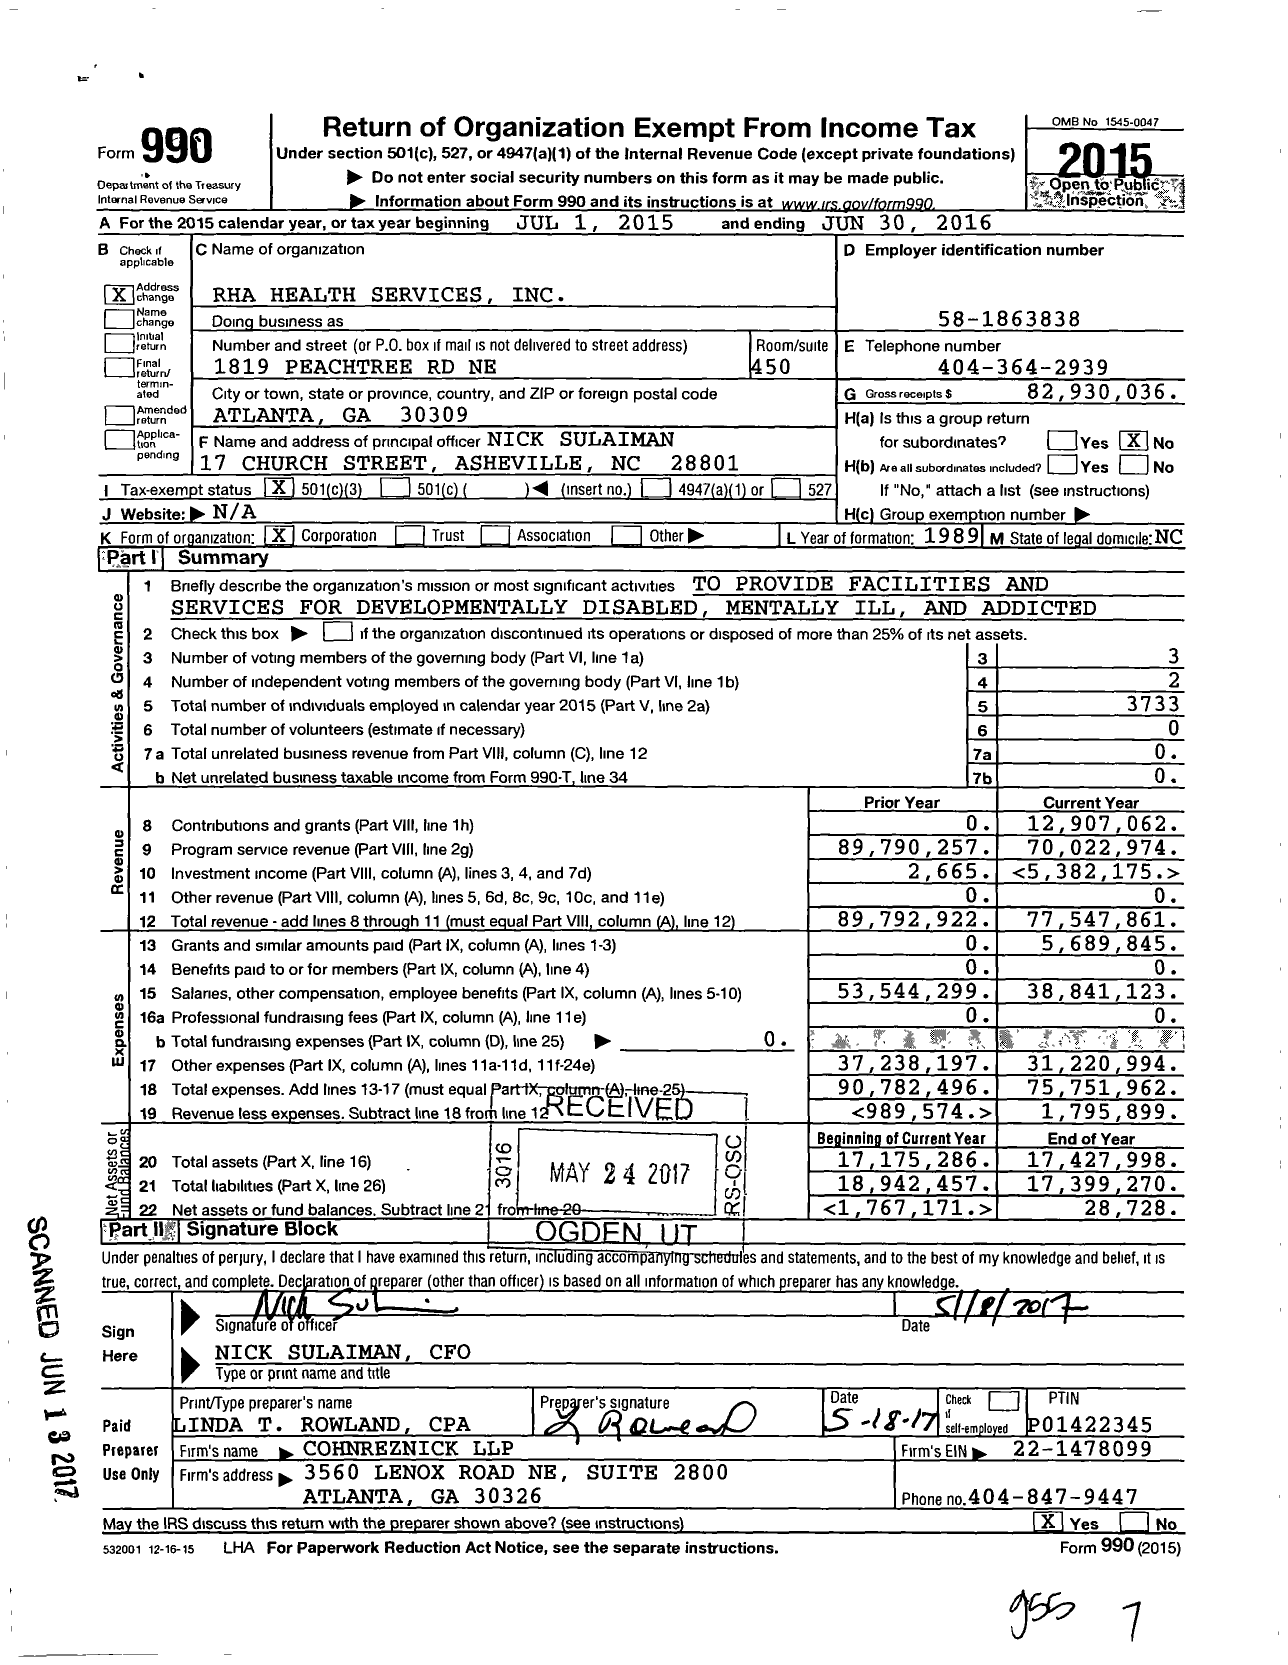 Image of first page of 2015 Form 990 for Rha Health Services